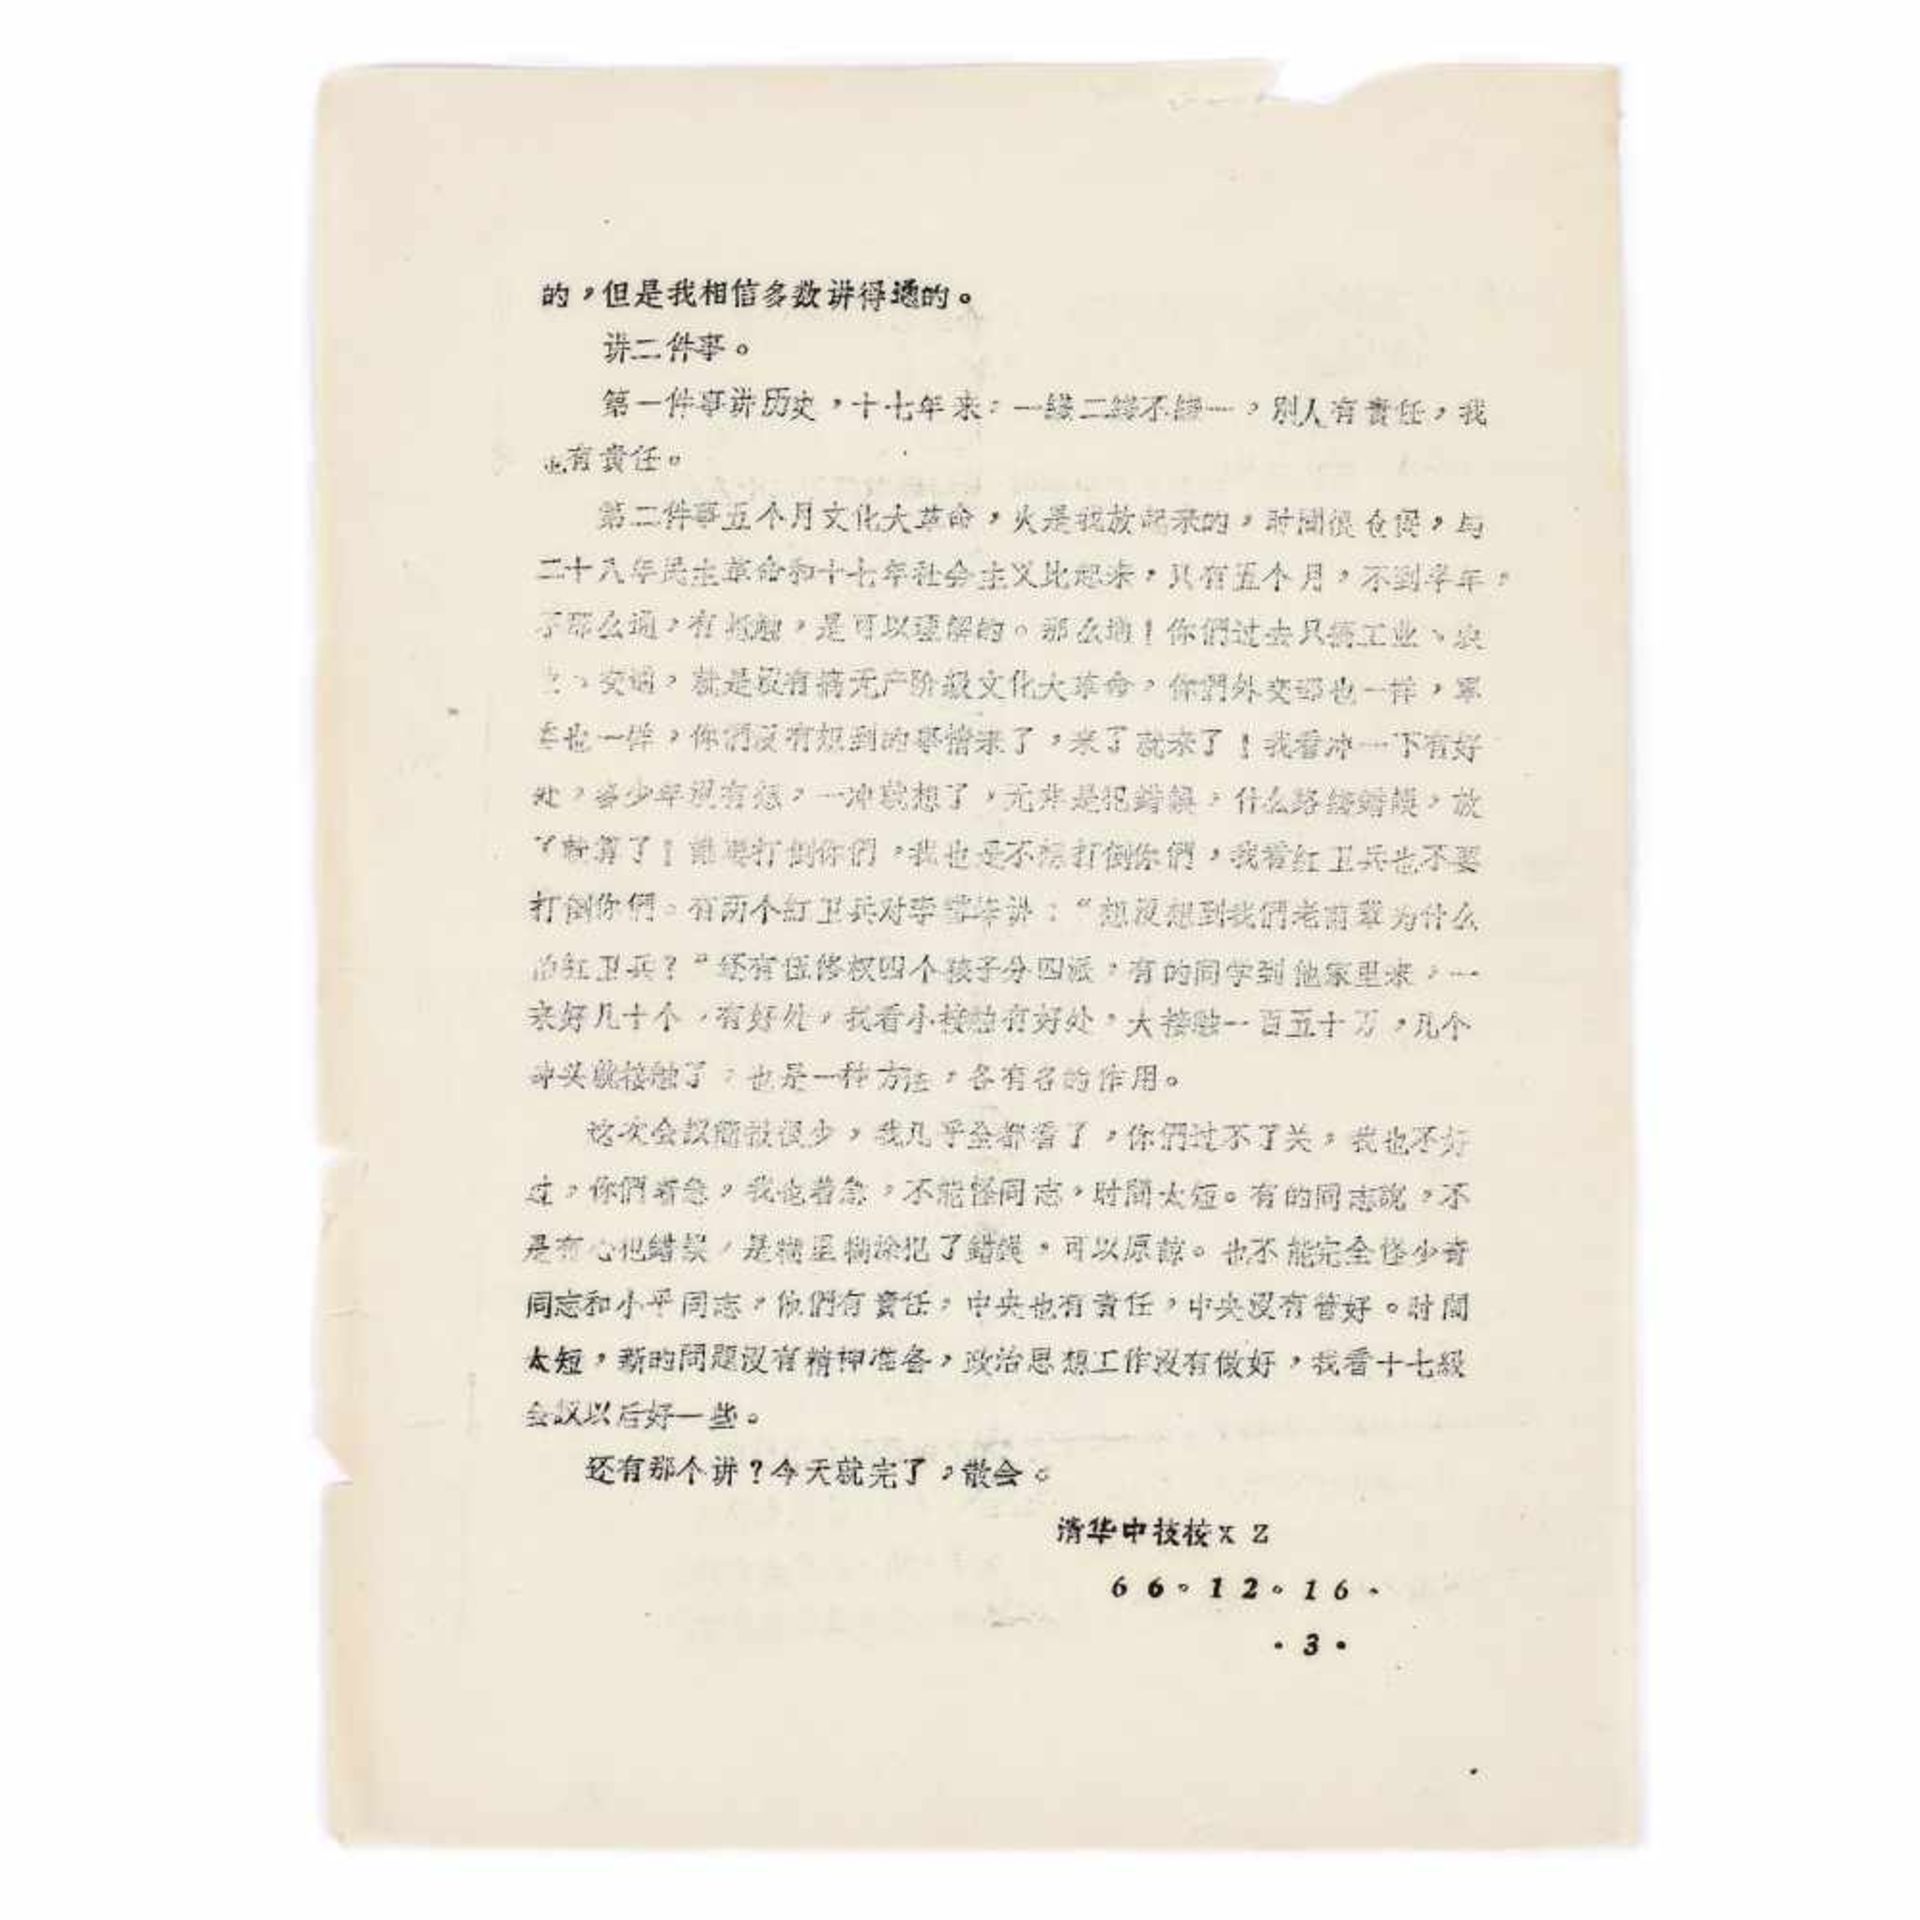 Transcript of a speech by Mao Zedong, leader of the Communist Party of China, during a party meeting - Bild 4 aus 4